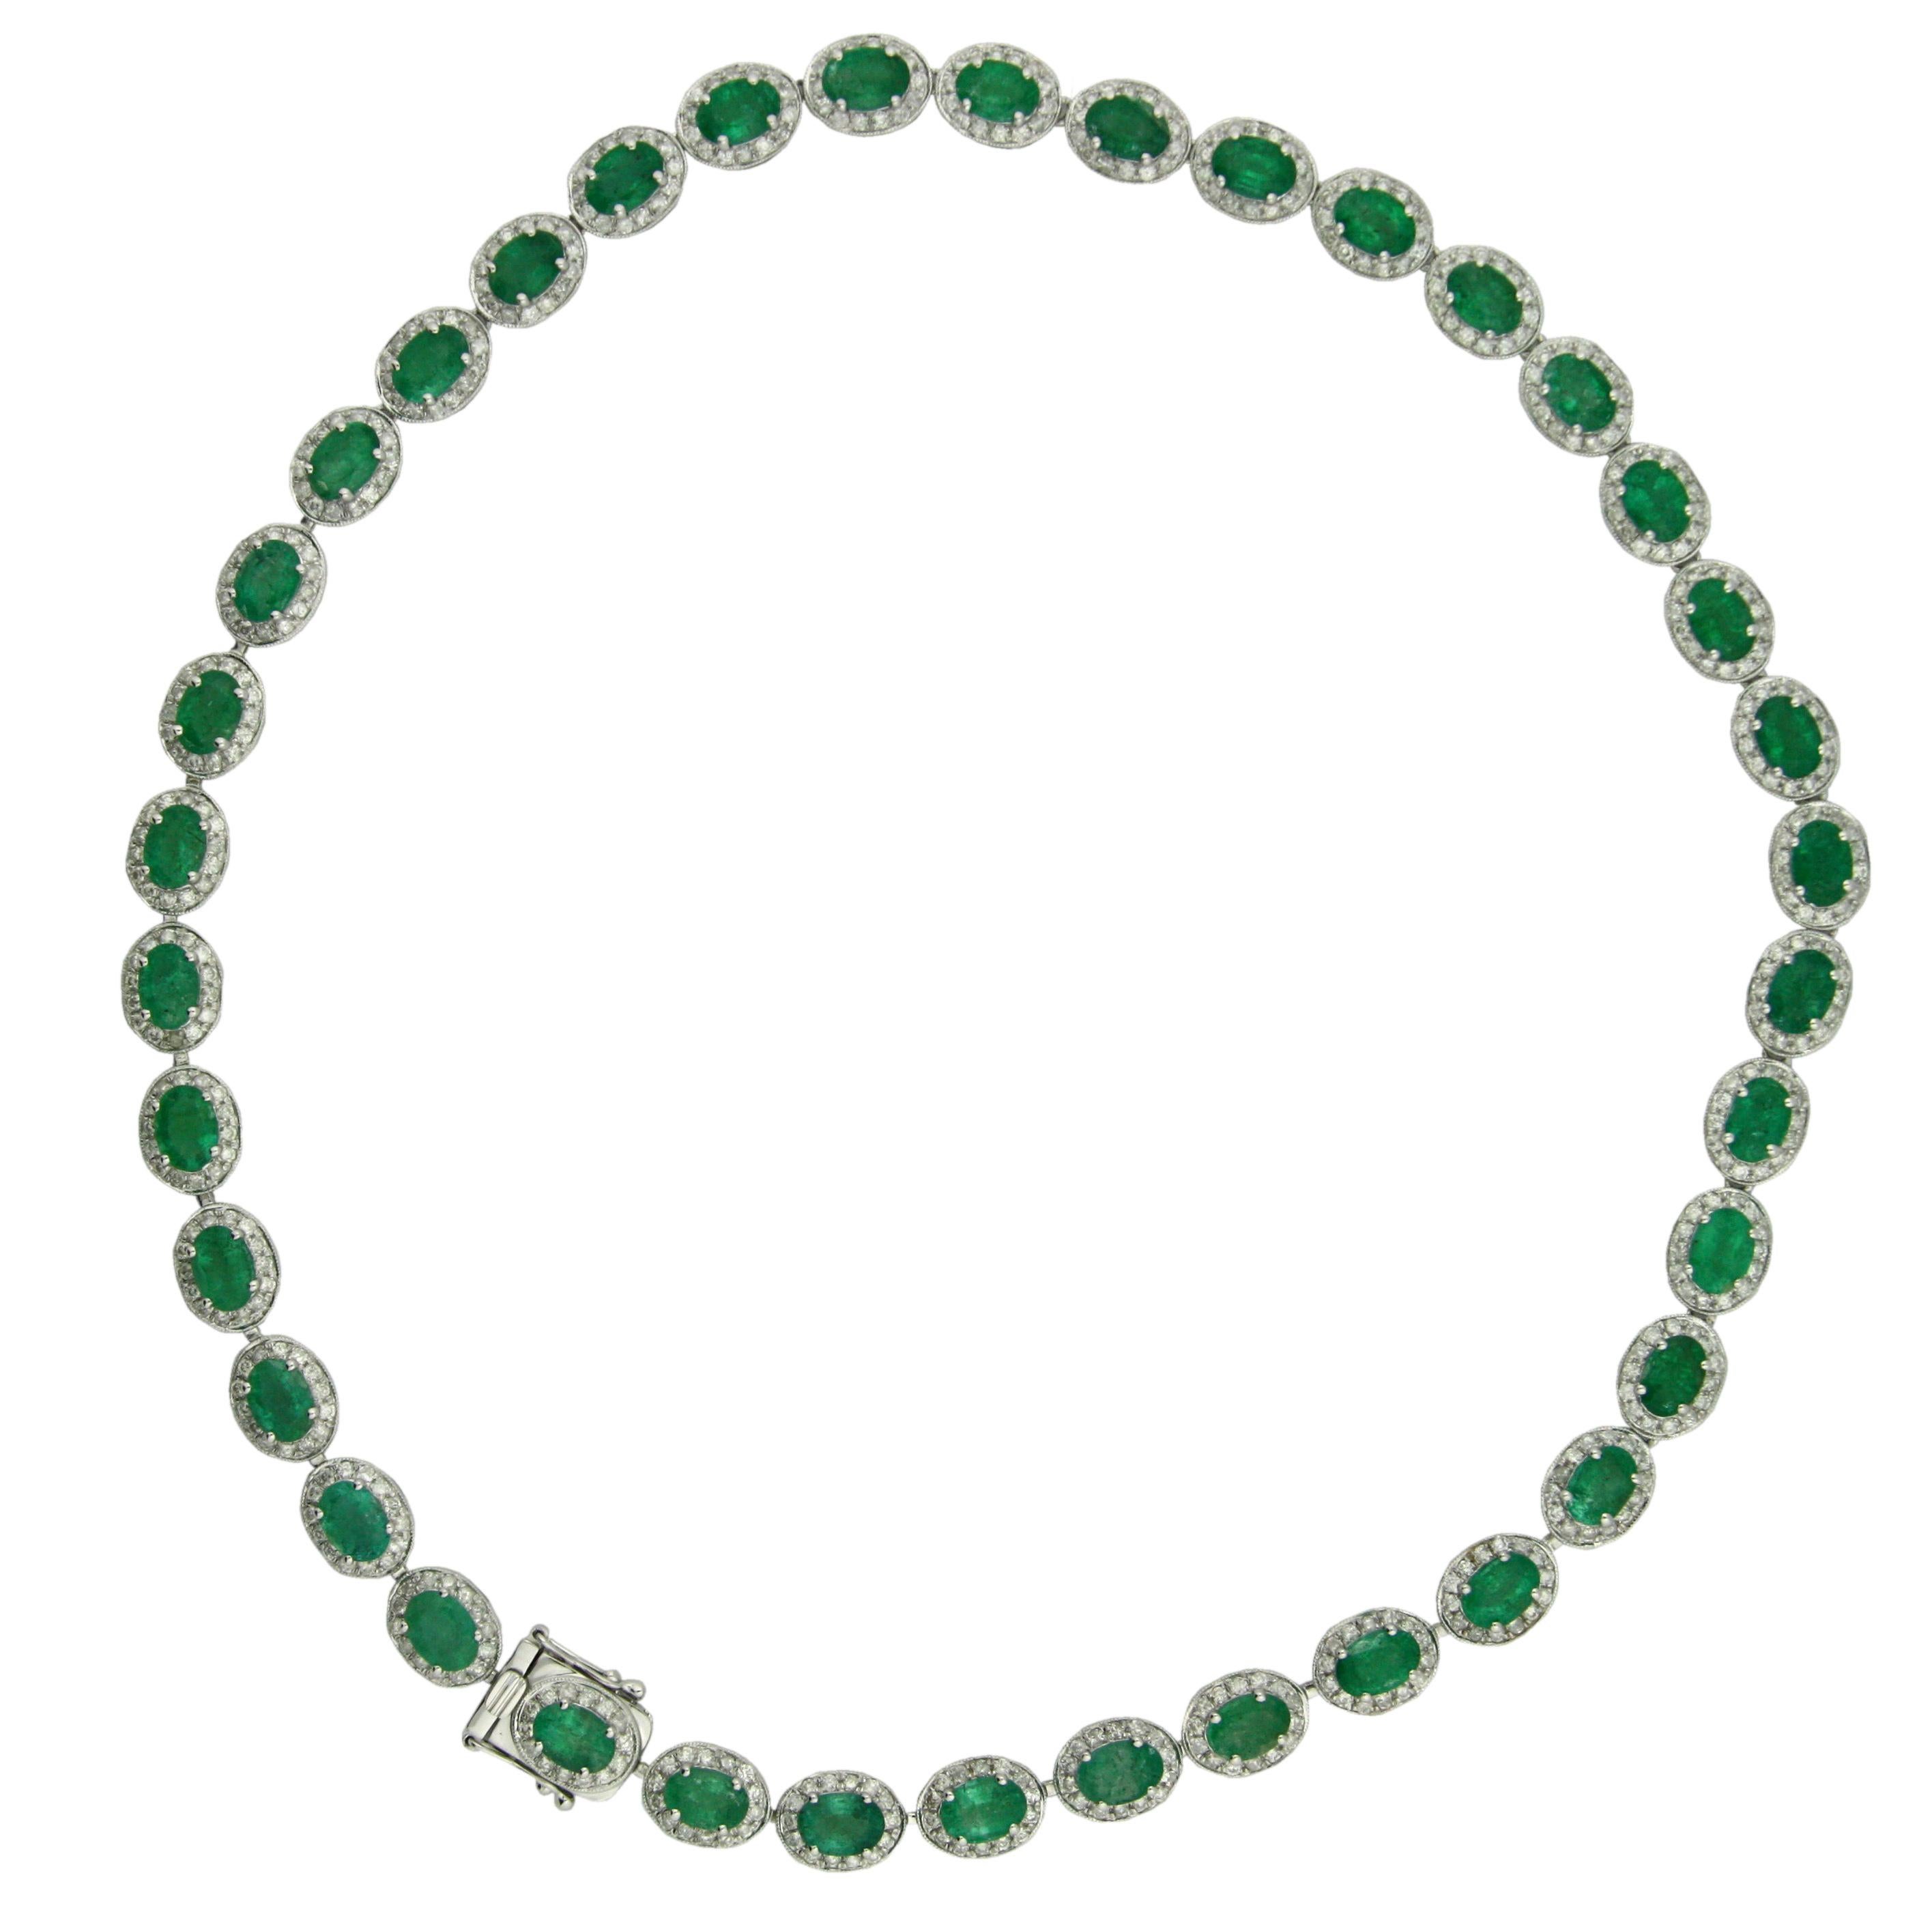 14K Gold Emerald and Diamond Necklace 
Featuring thirty-eight oval-shaped step-cut natural emeralds, each measuring 7 x 5 mm, weighing approximately 27.46 carats,  
Emeralds set within a surround of five-hundred thirty-two round, brilliant-cut